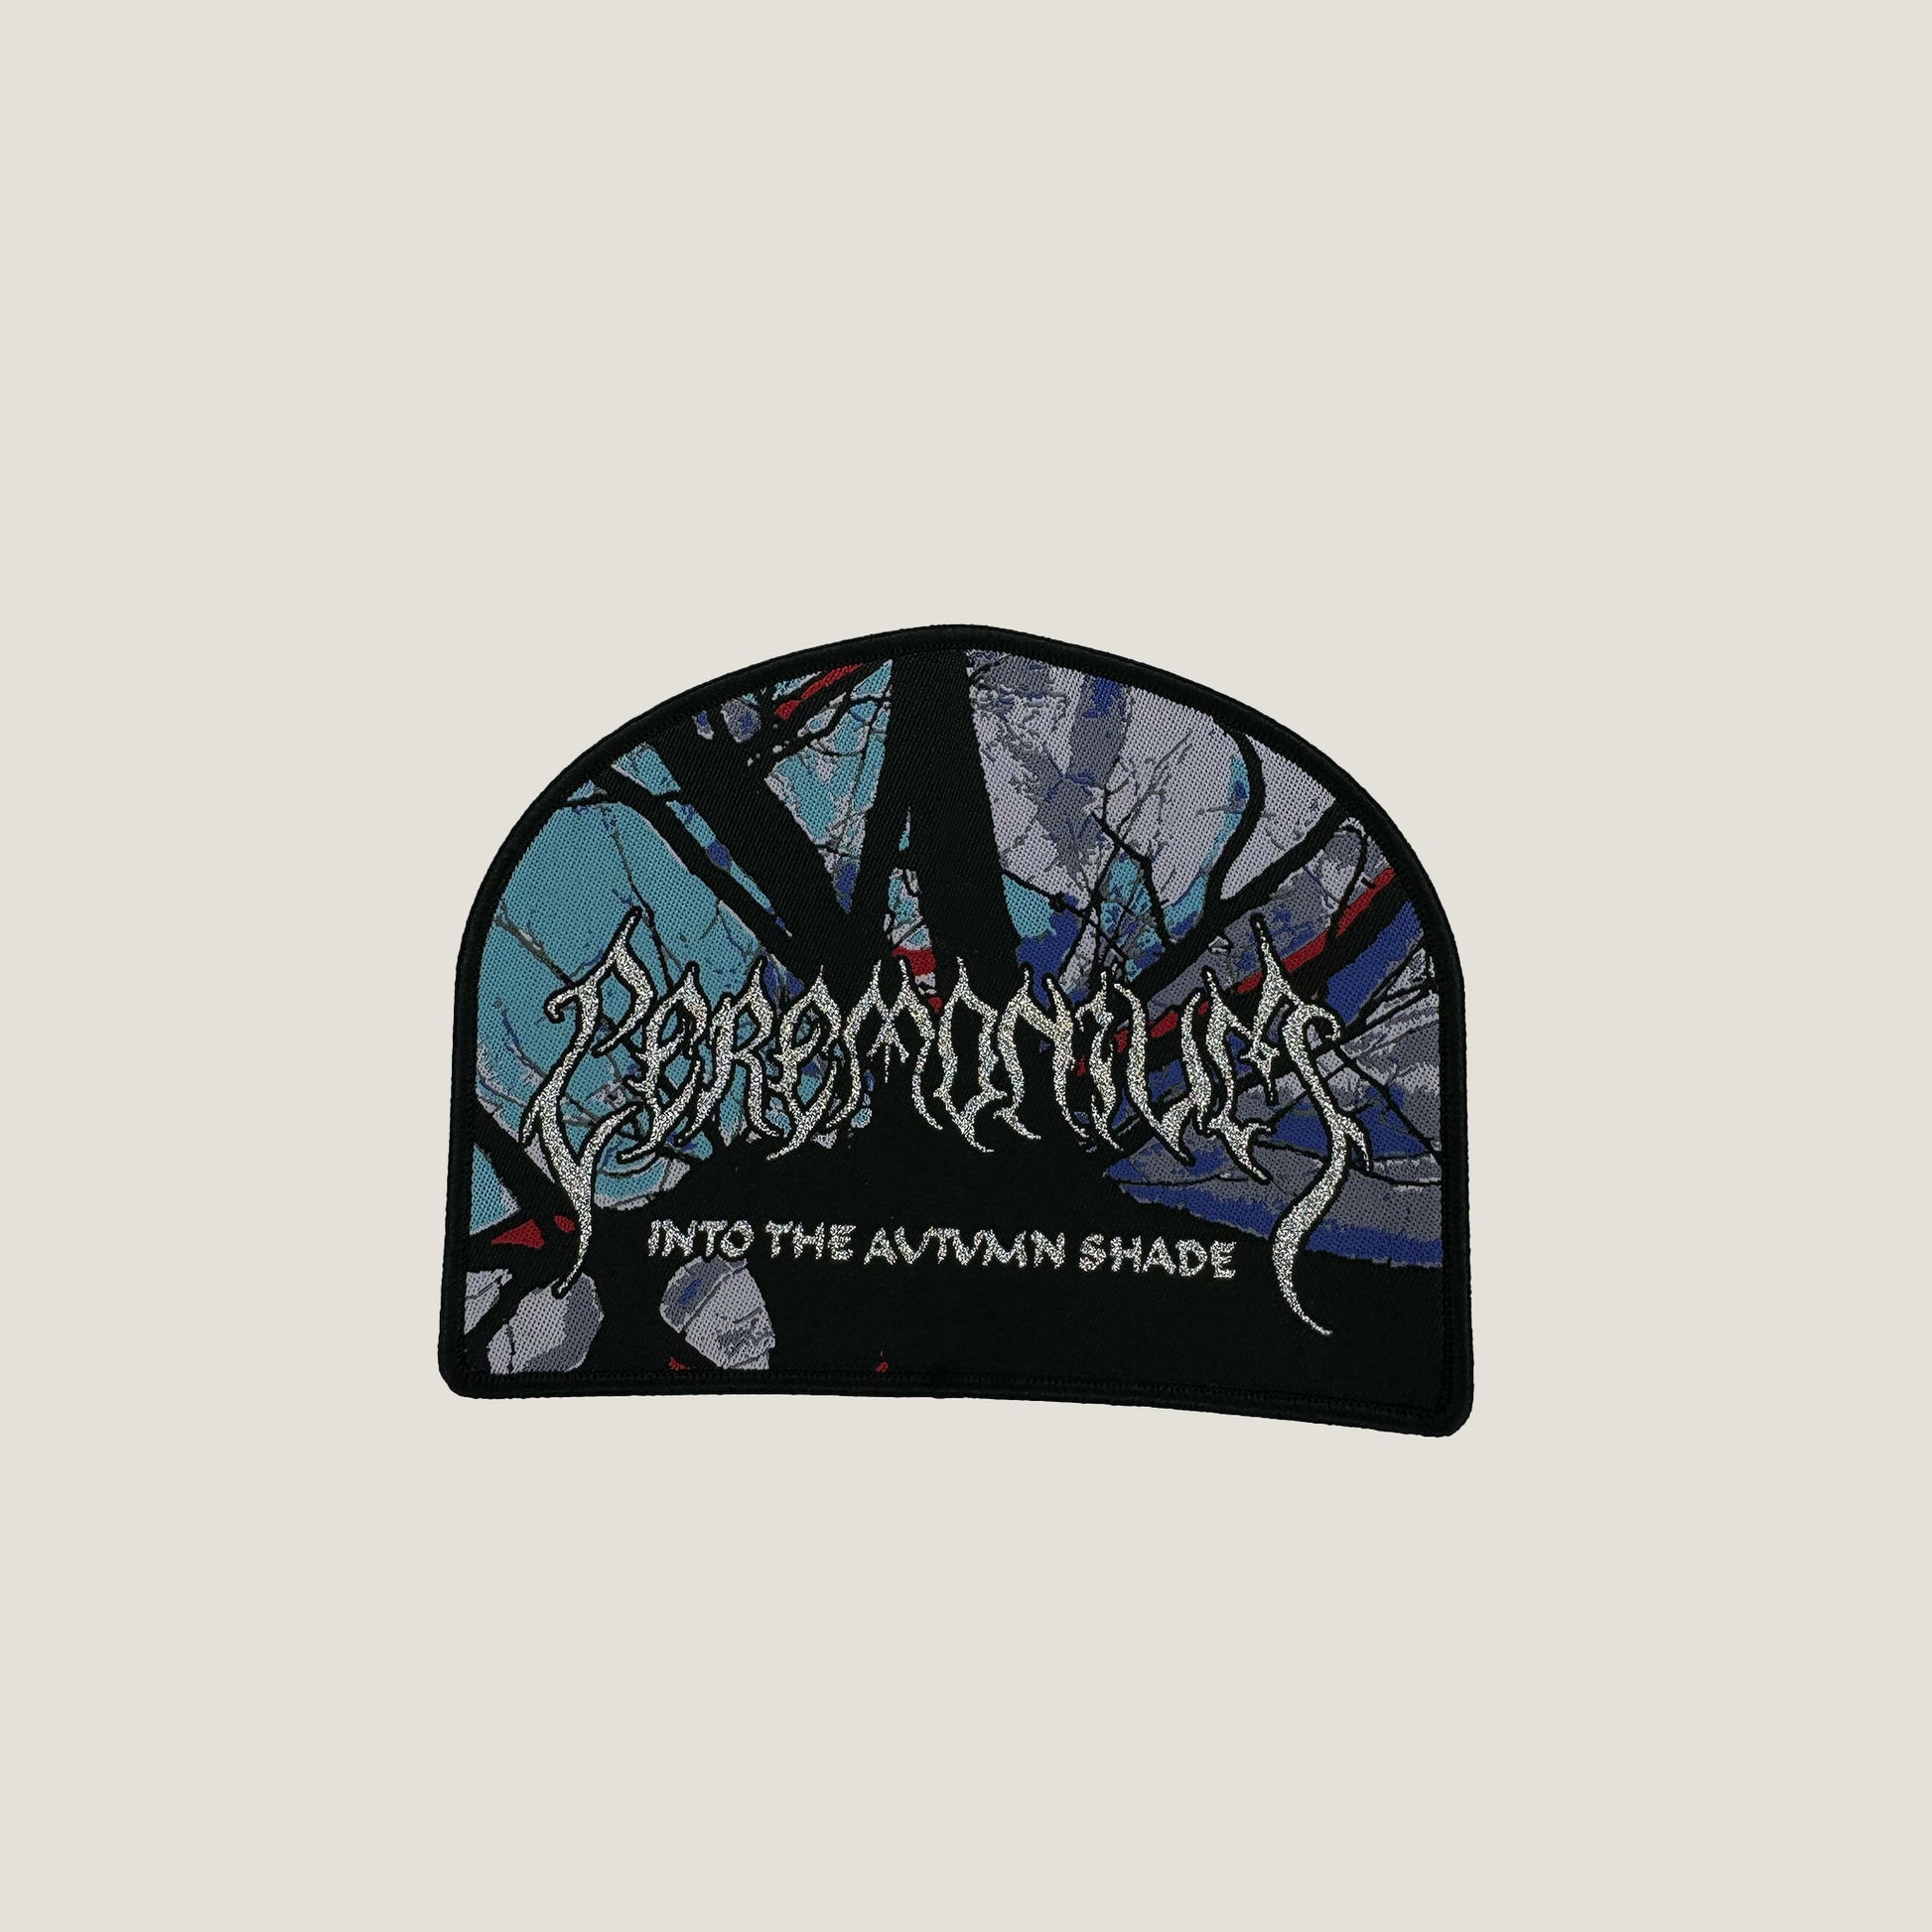 Temporal Dimensions Patches Ceremonium Into The Autumn Shade Black Border Woven Patch